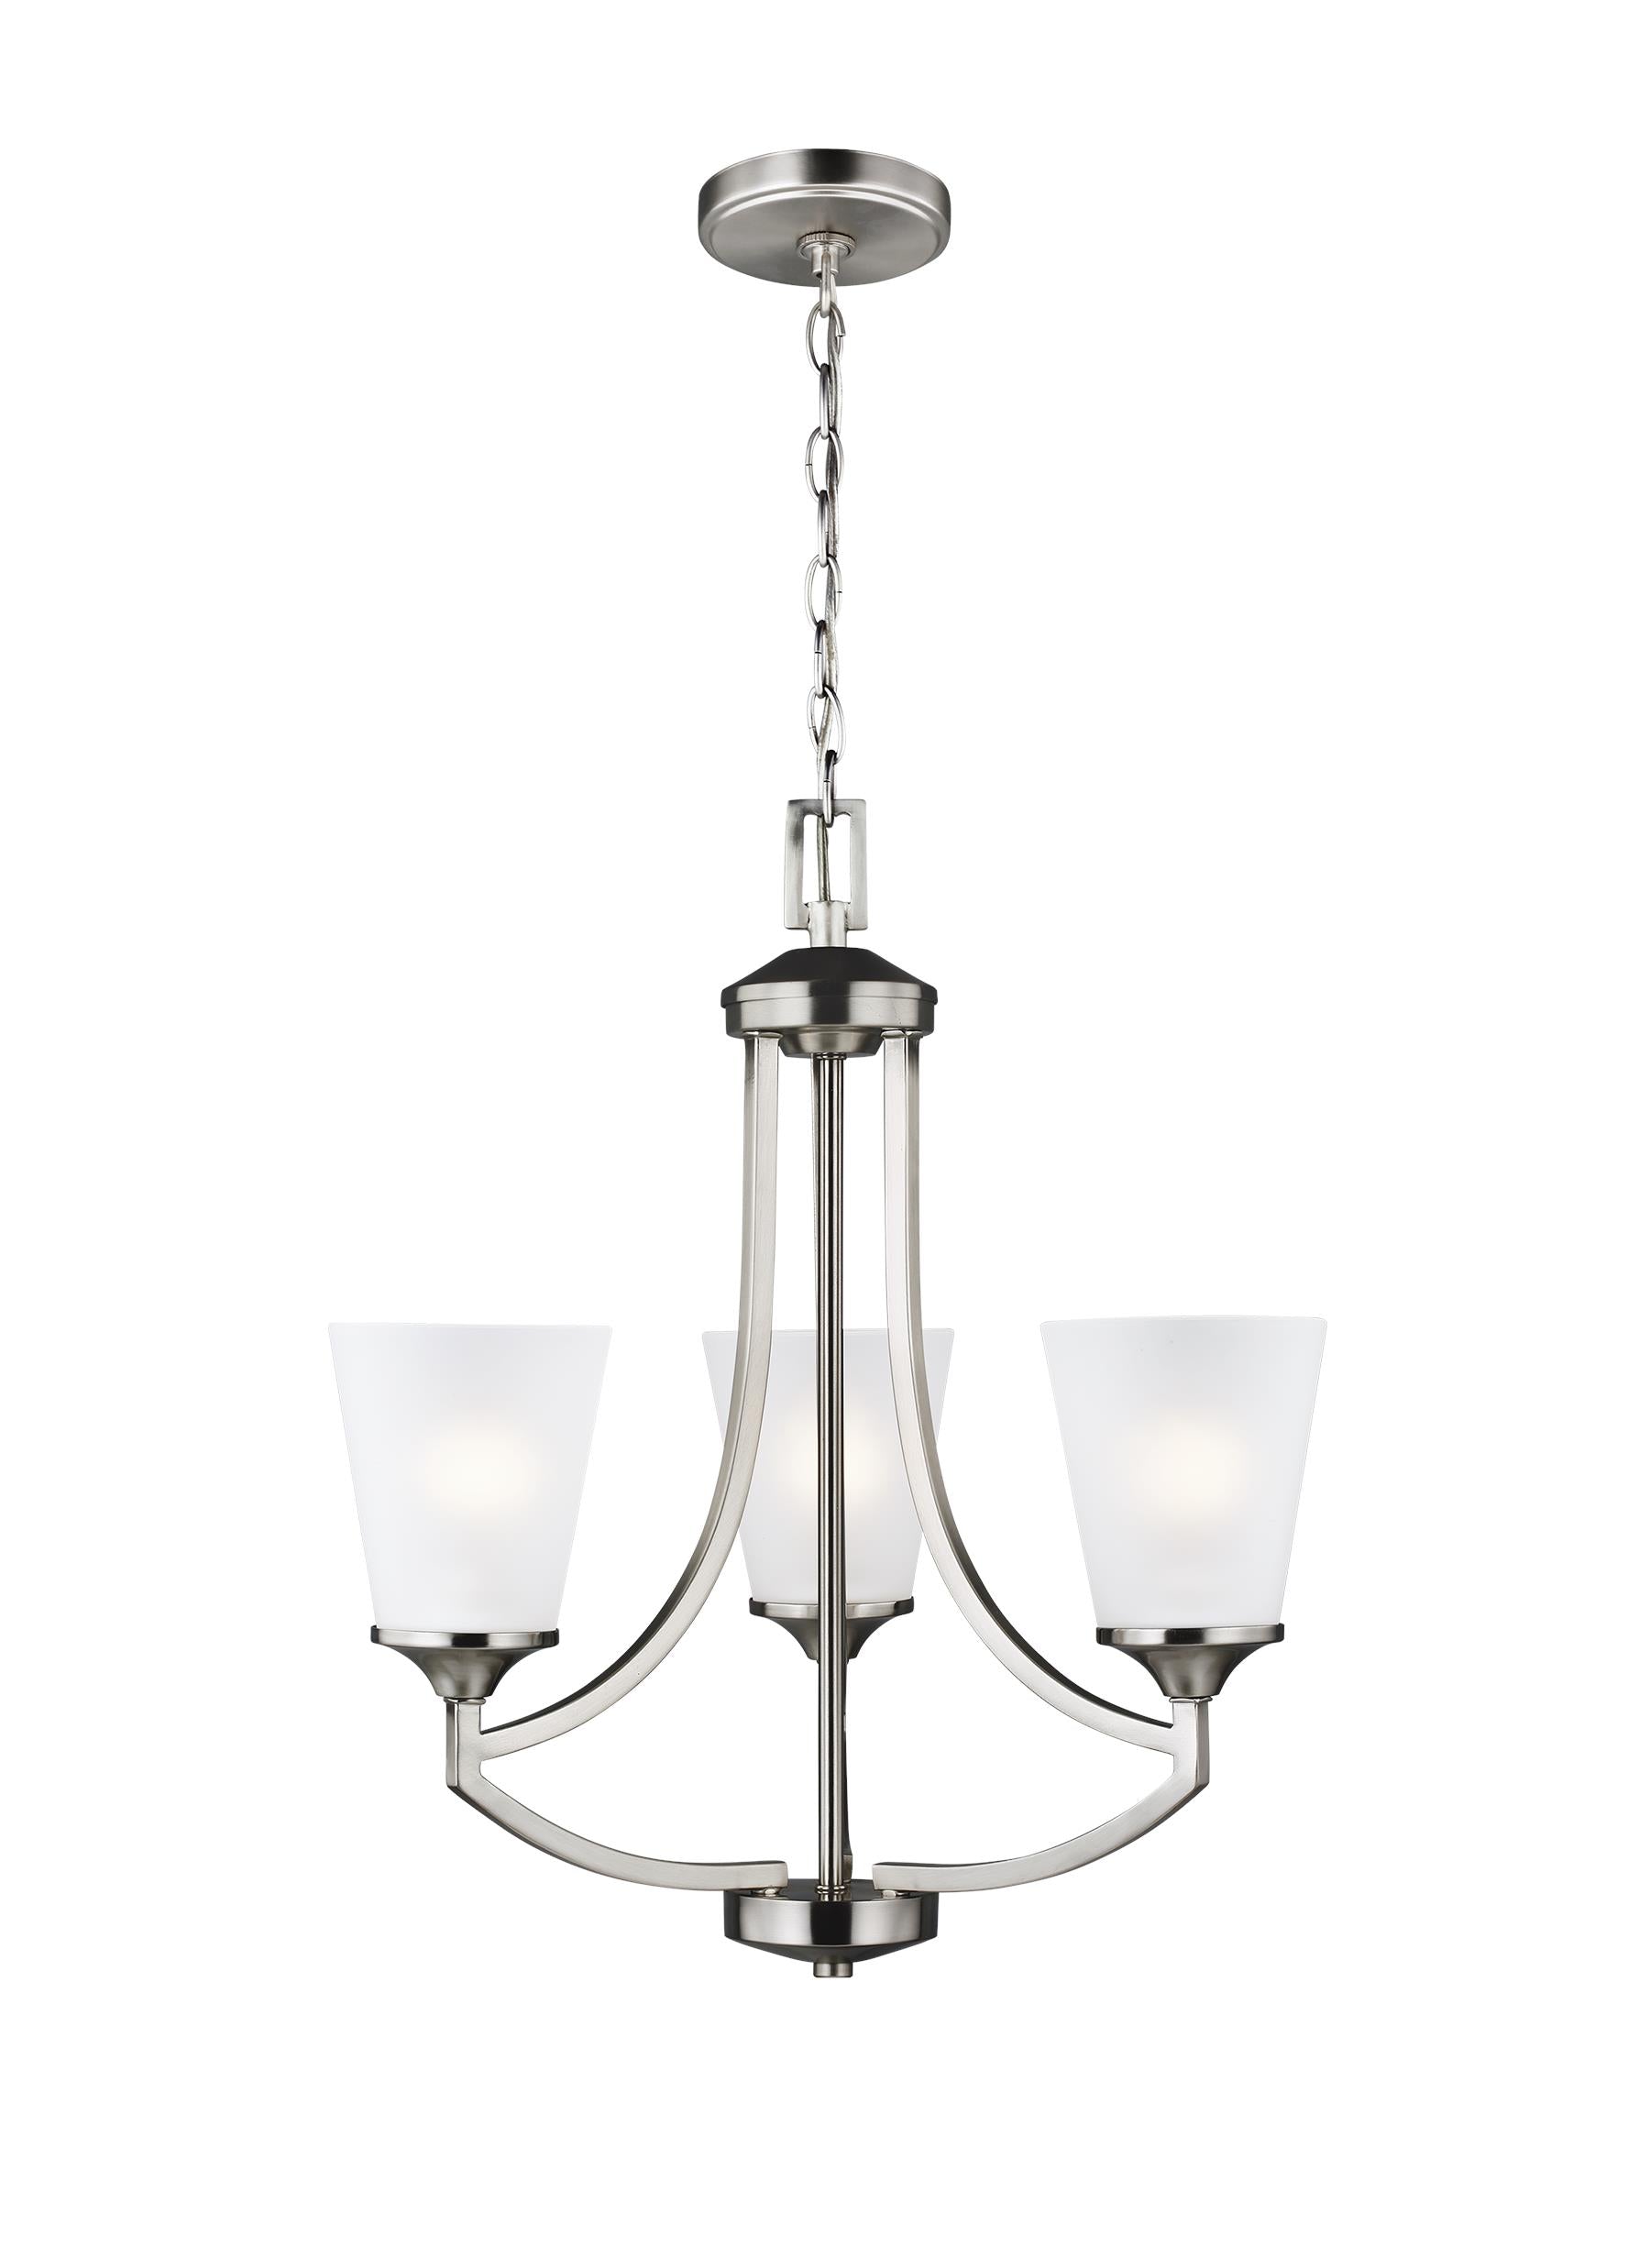 Hanford traditional 3-light indoor dimmable ceiling chandelier pendant light in brushed nickel silver finish with satin et...